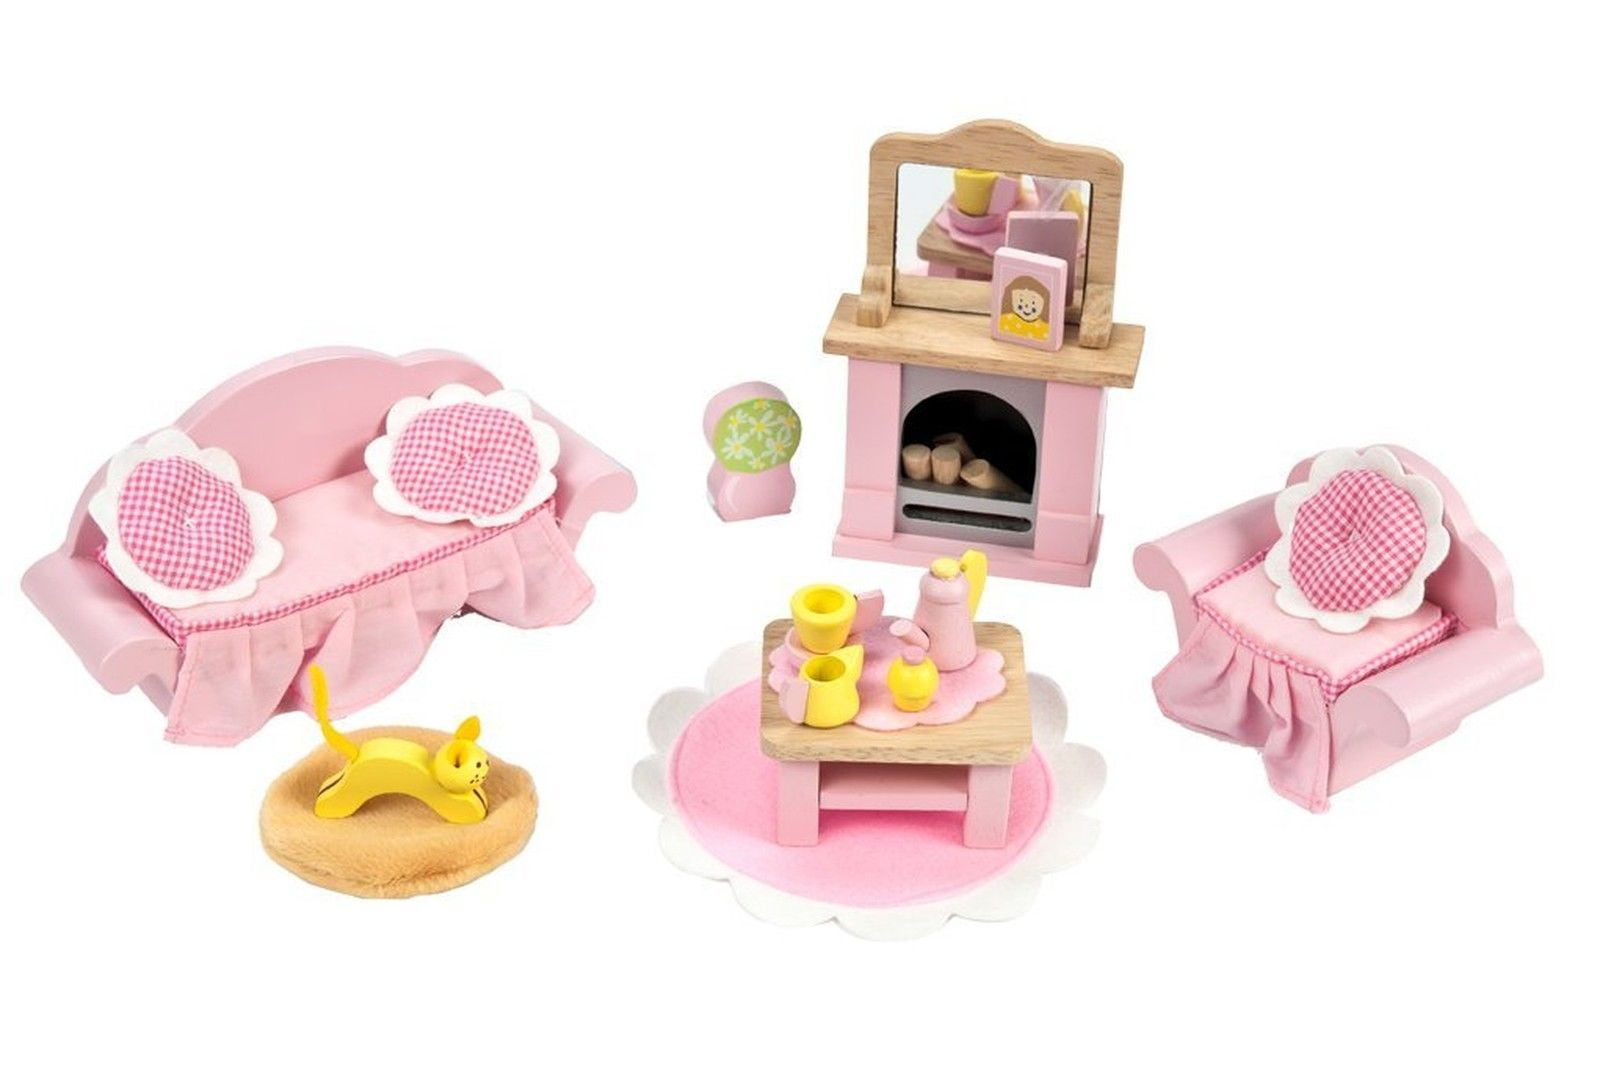 LE TOY VAN SITTING ROOM LOUNGE DAISY LANE DOLLS HOUSE WOODEN FURNITURE FREE P&P 